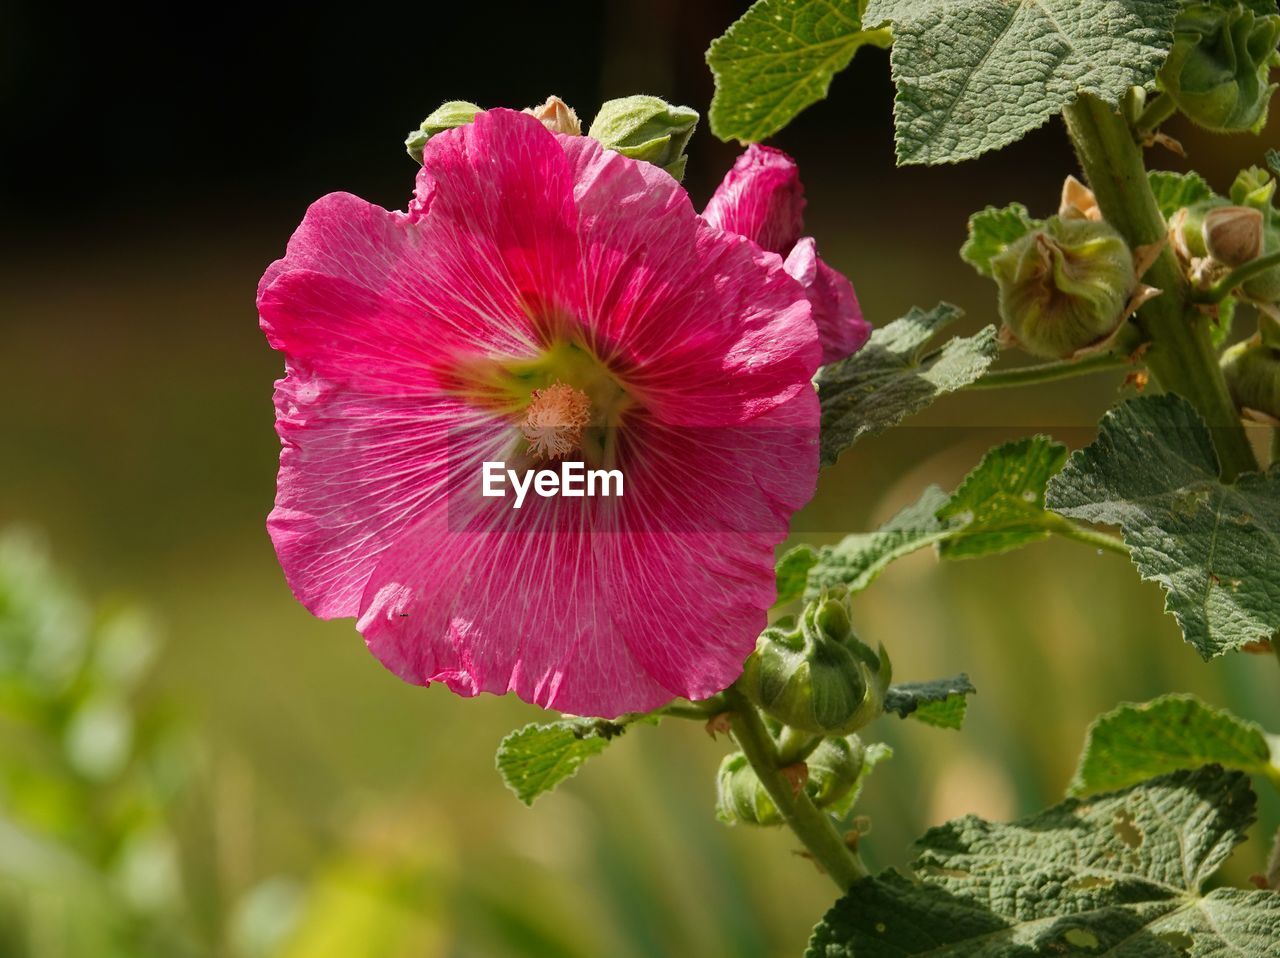 CLOSE-UP OF PINK HIBISCUS PLANT